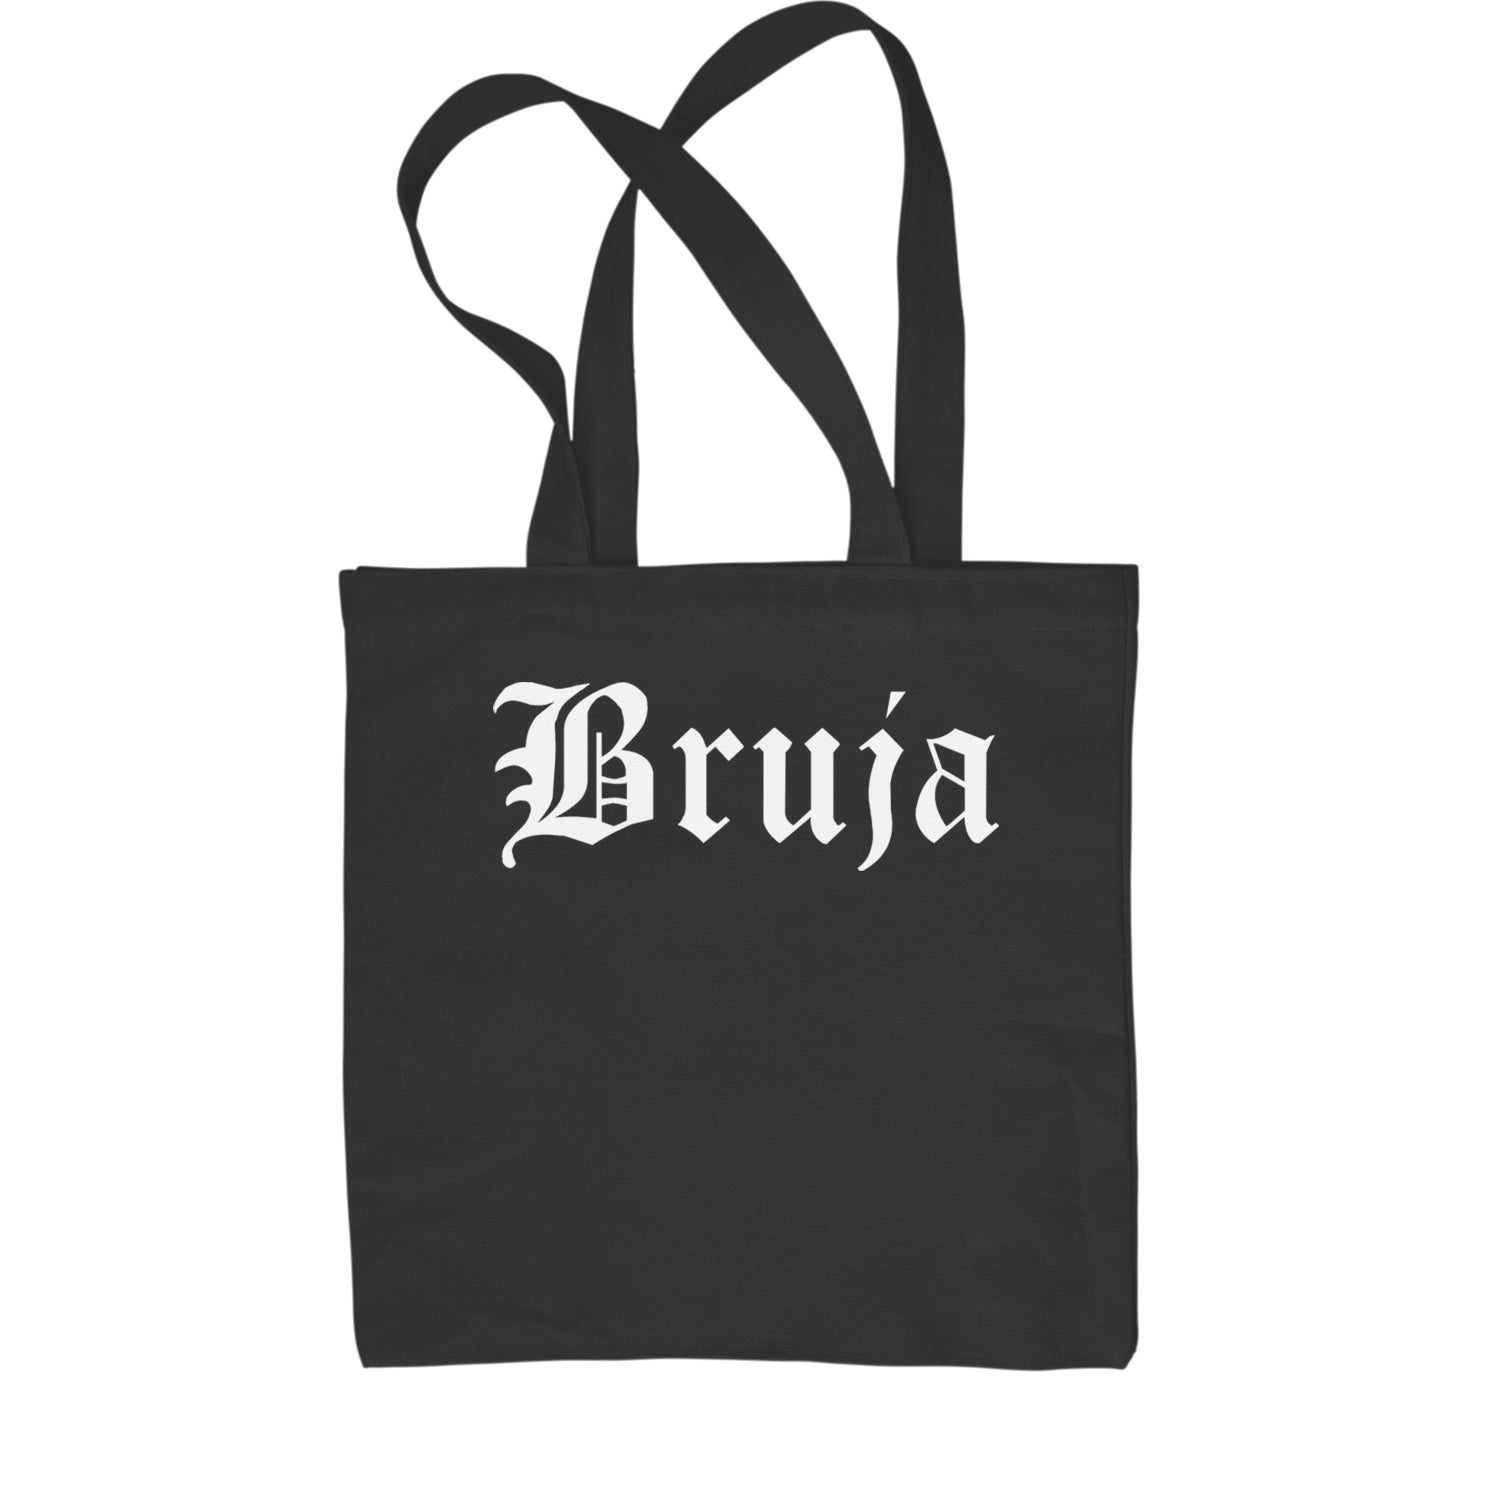 Bruja Gothic Spanish Witch Shopping Tote Bag